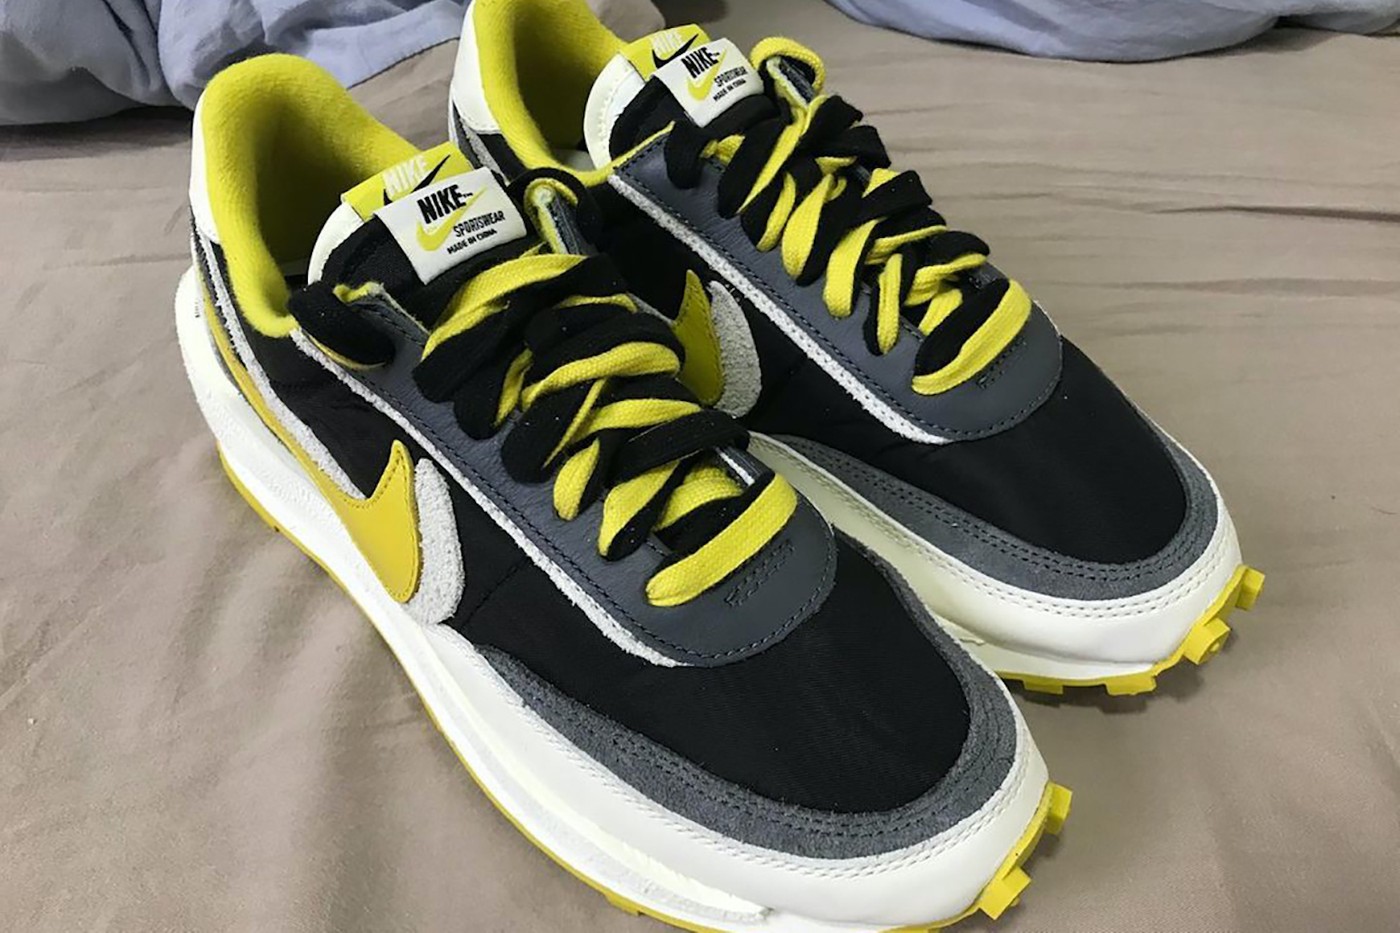 #Release : UNDERCOVER x sacai x Nike LDWaffle "Bright Citron"